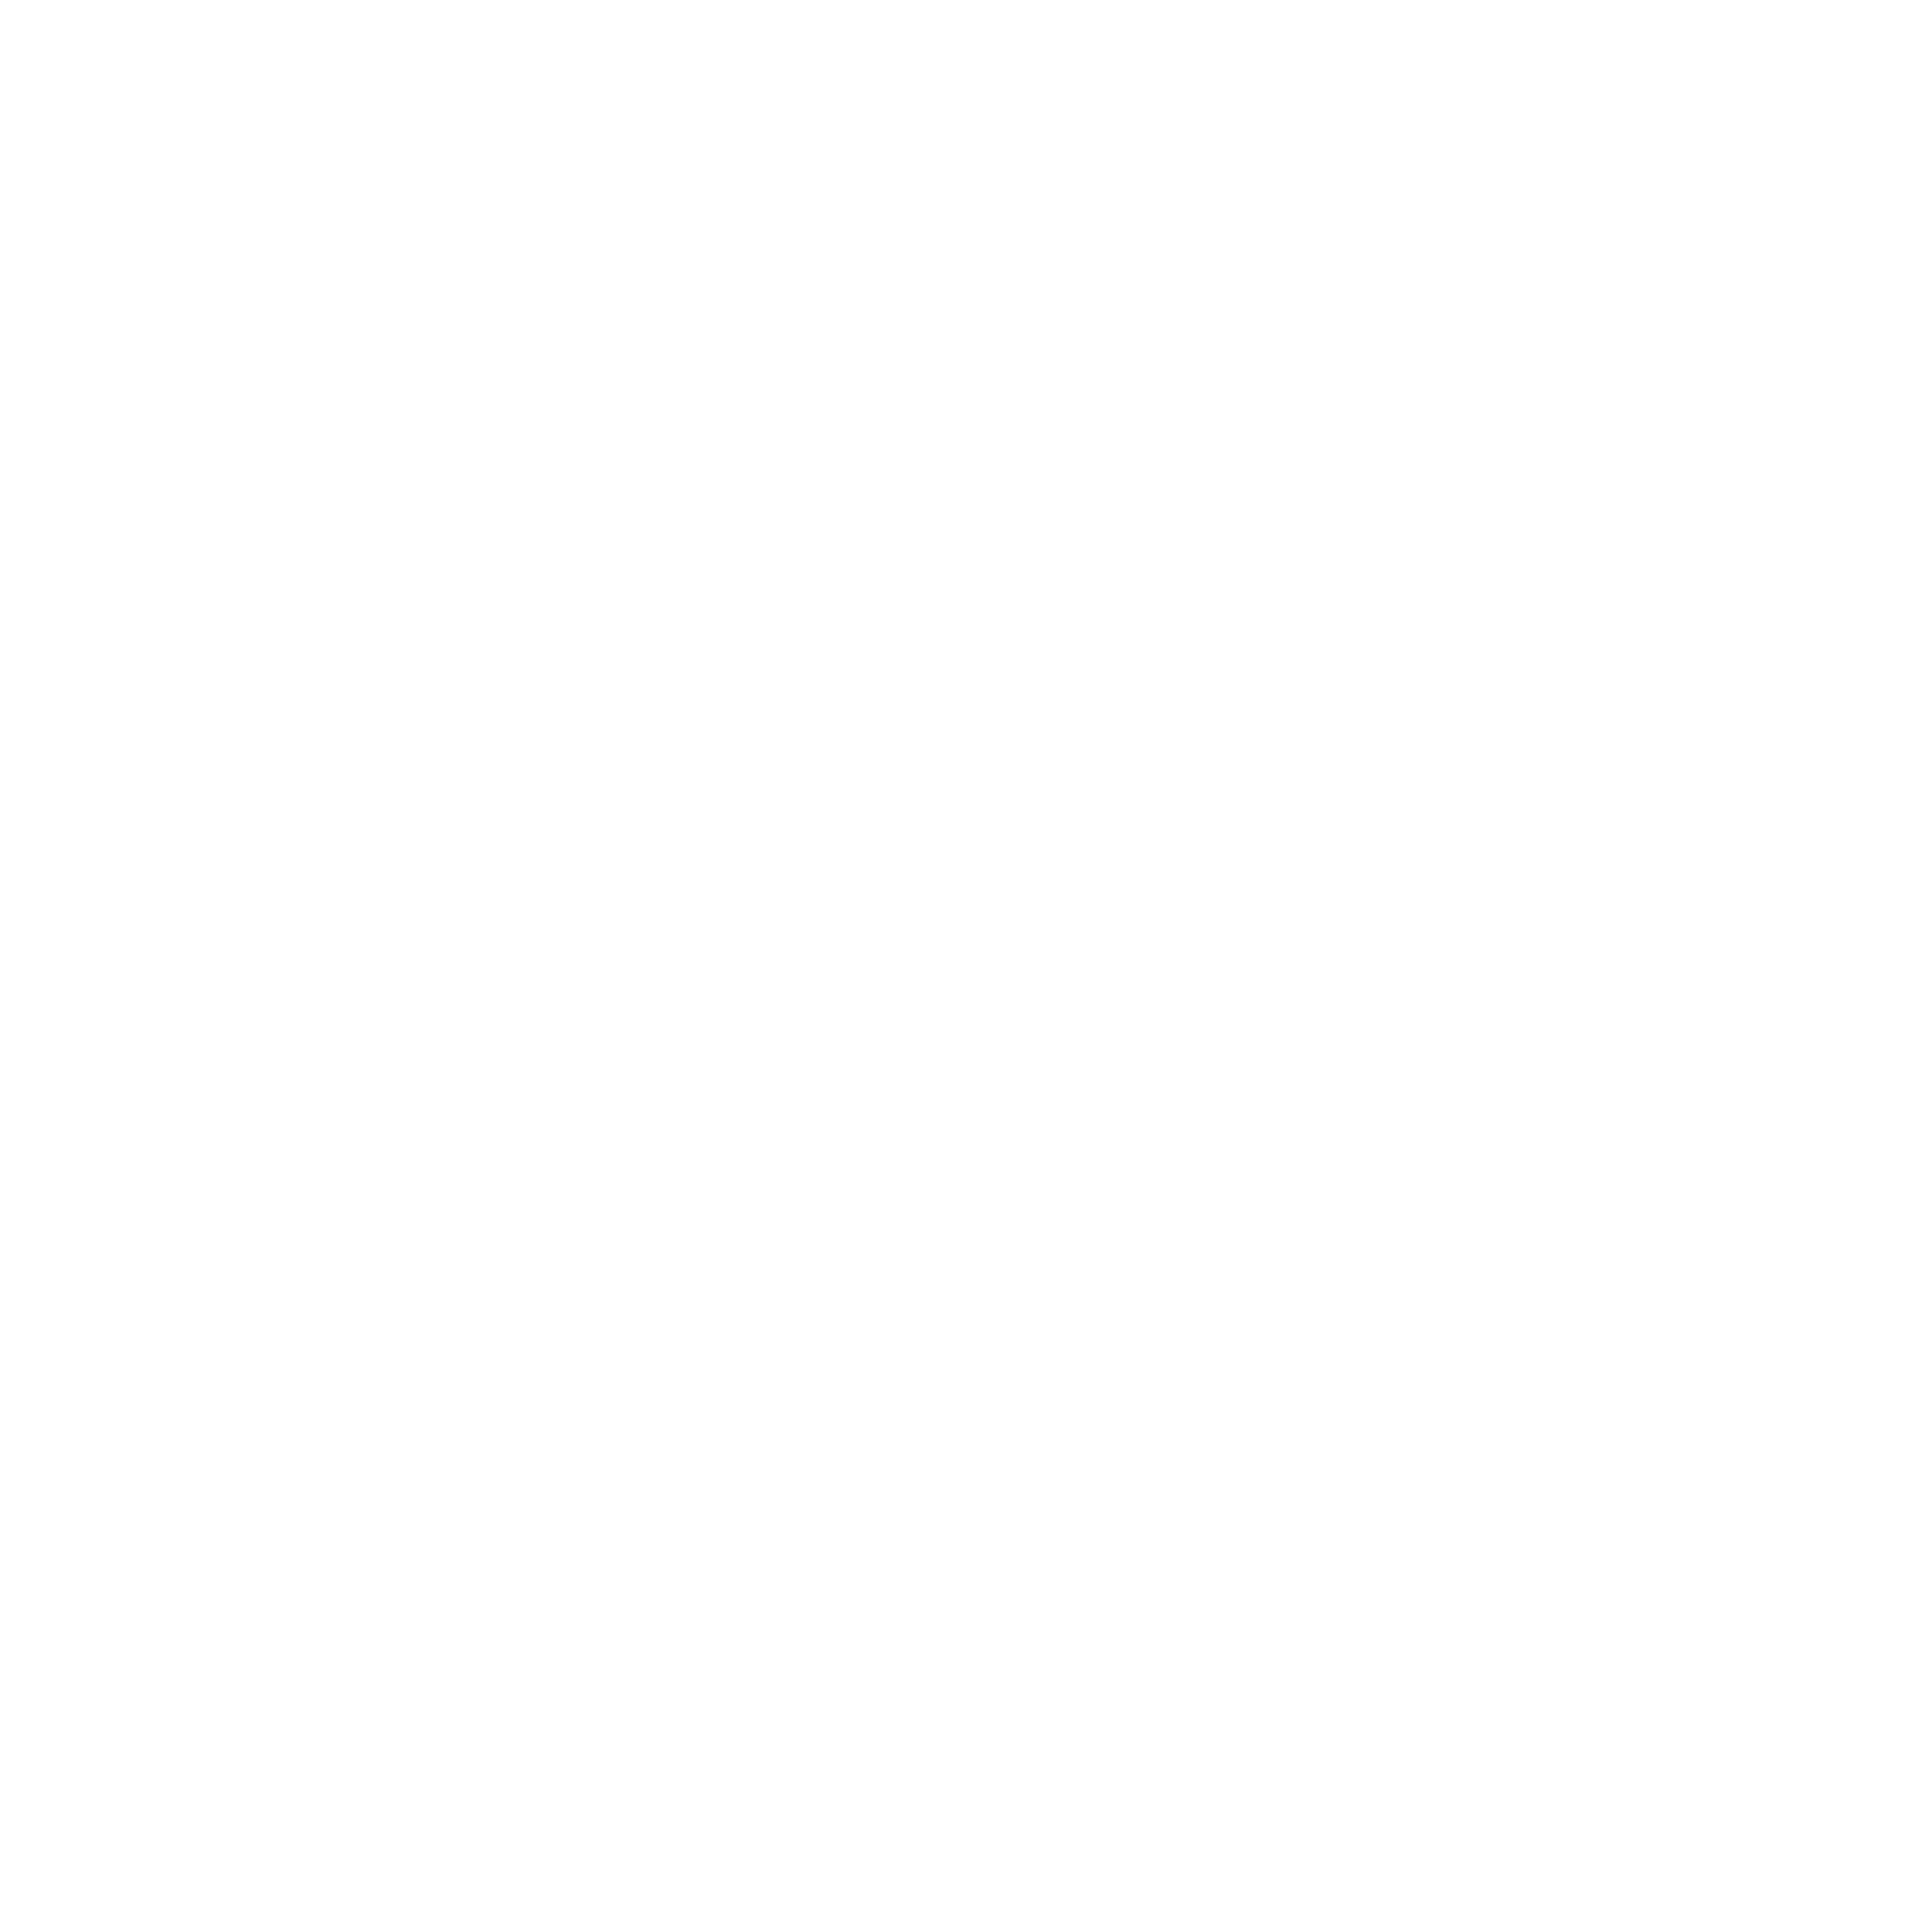 Logos of clients from left to right 3 rows, Ministry of Defence, Warner Bros, Wilmott Dixon, Discovery Channel, Teckro, Airtime Rewards, Canesten, Mojo Mortgages, Scape Group